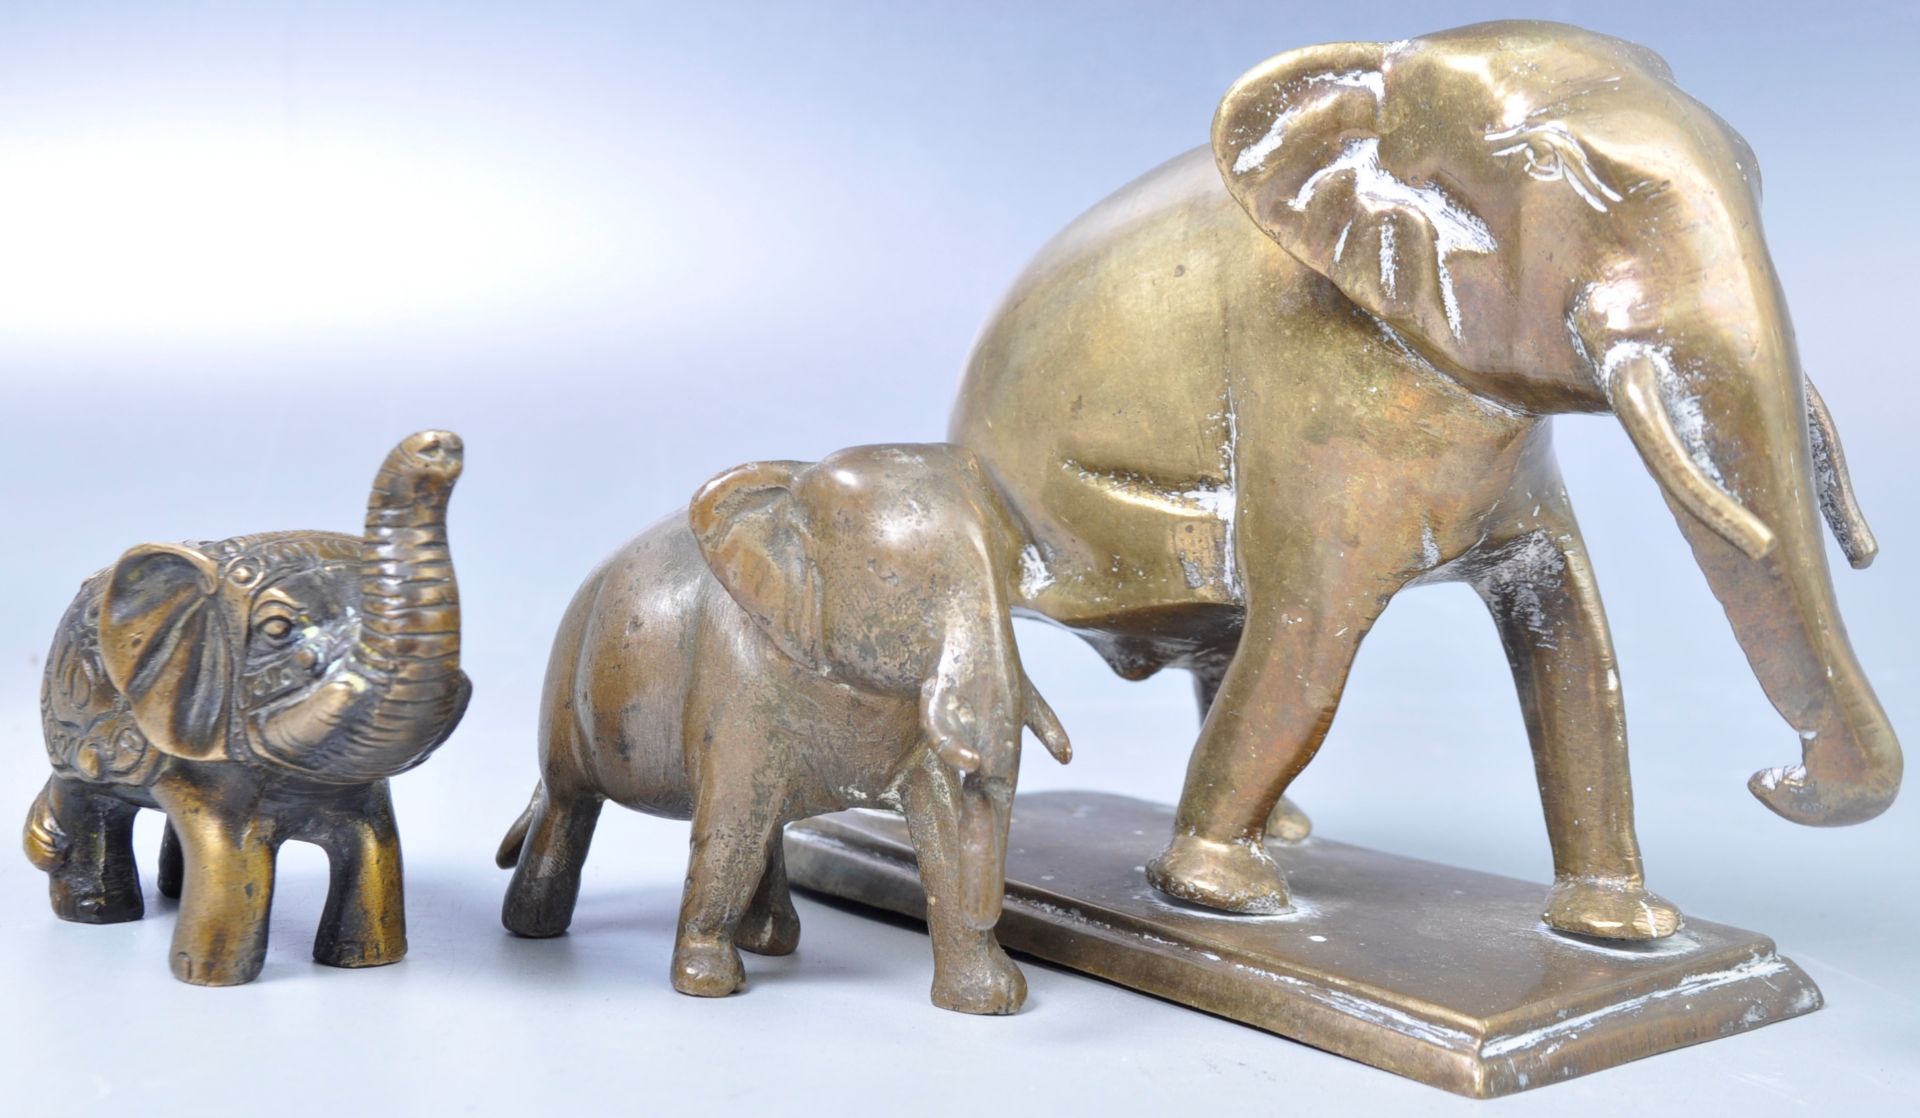 COLLECTION OF INDIAN ANTIQUE ELEPHANT FIGURINES